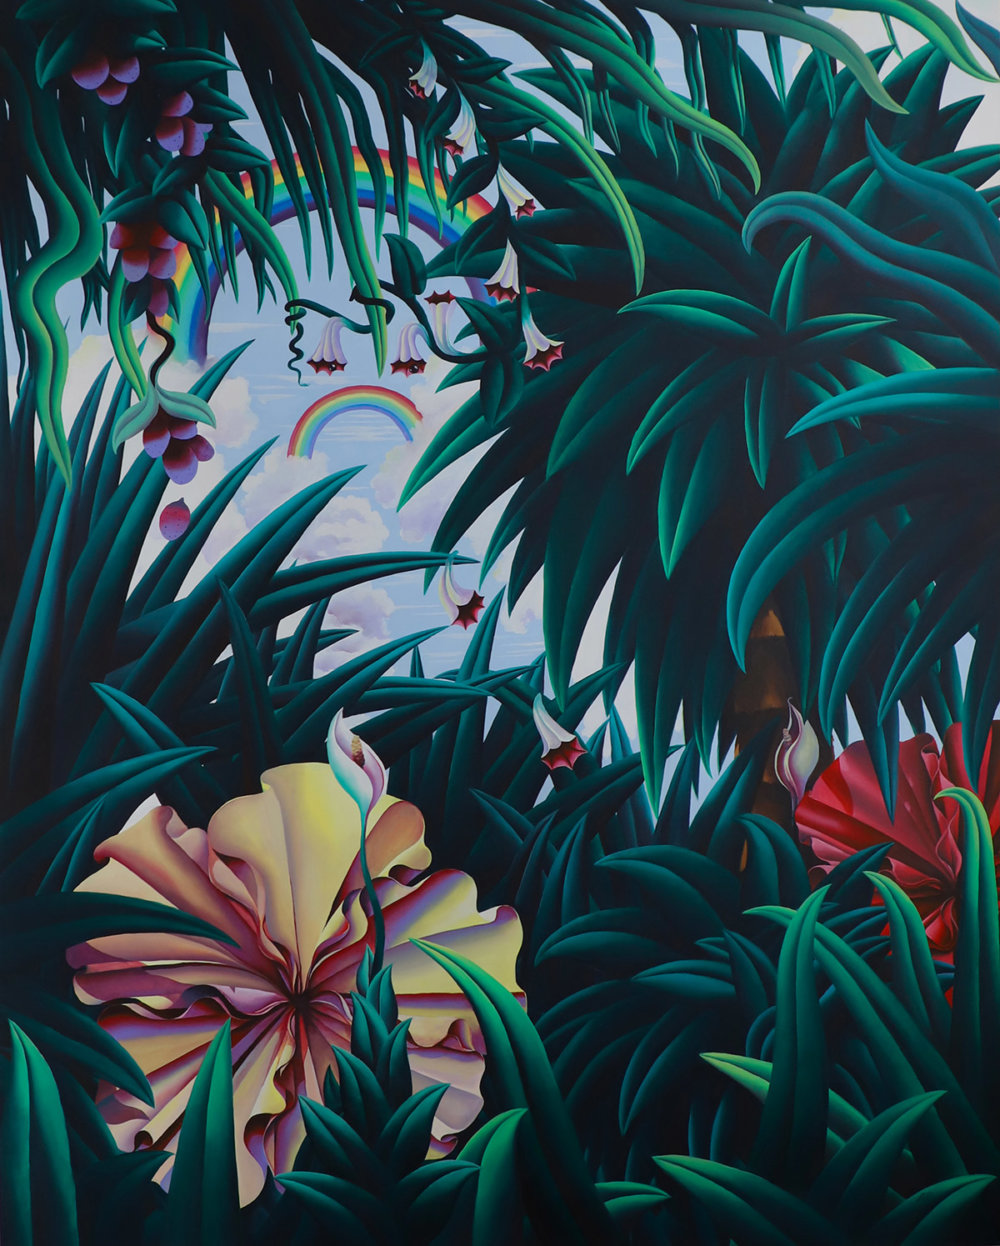 Elegant Chaos Vibrant Surrealist Paintings Of Tropical Fauna And Flora By Anthony Padilla 8